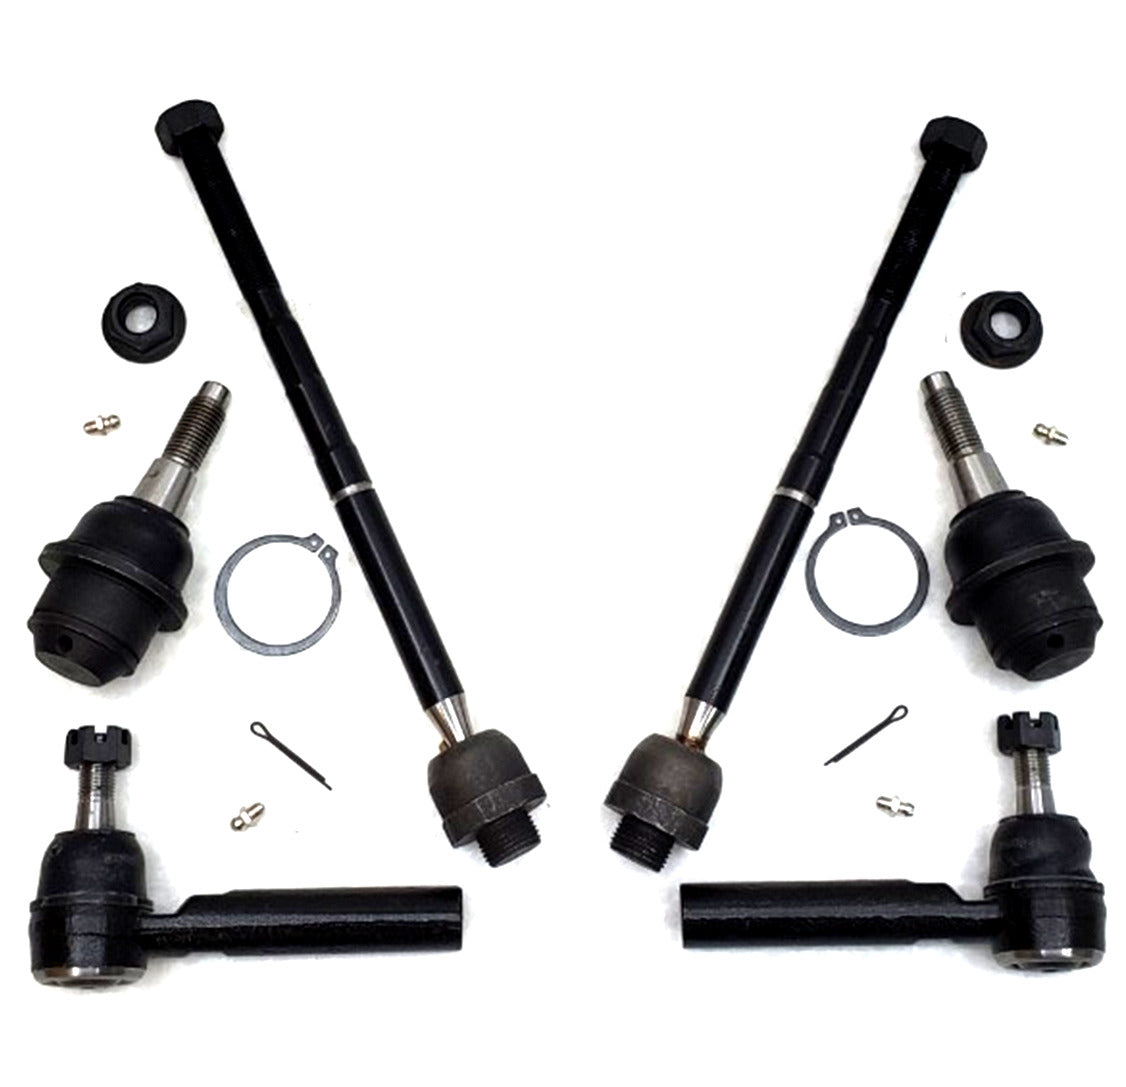 XRF Ball Joints Tie Rod Ends Steering Kit for 2007-2013 Cadillac, Chevrolet, GMC 2WD, 4x4